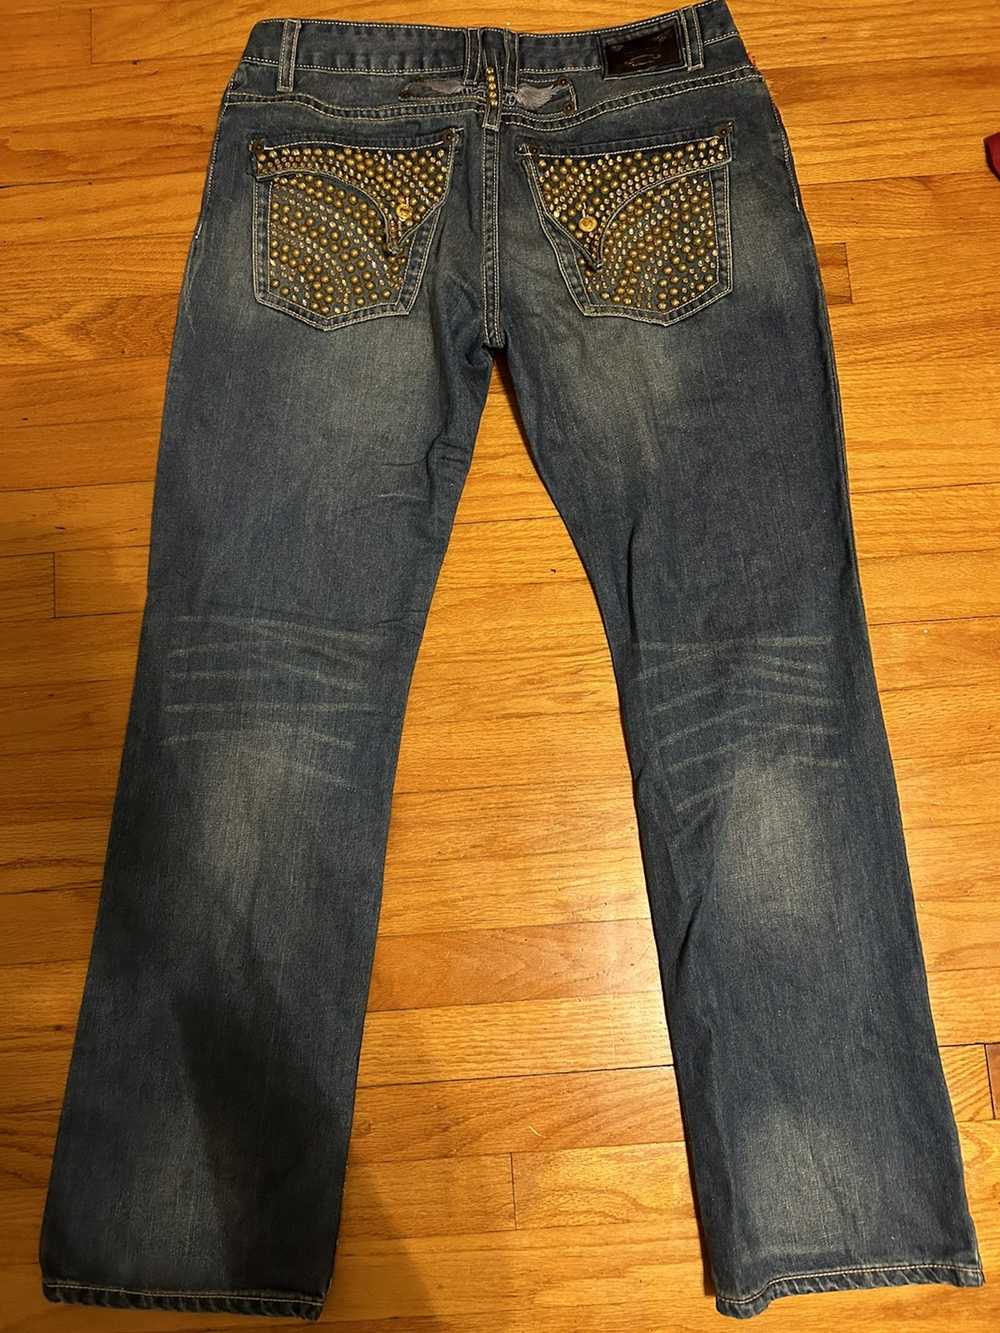 Robins Jeans Gold Studded Robins Jeans - image 1